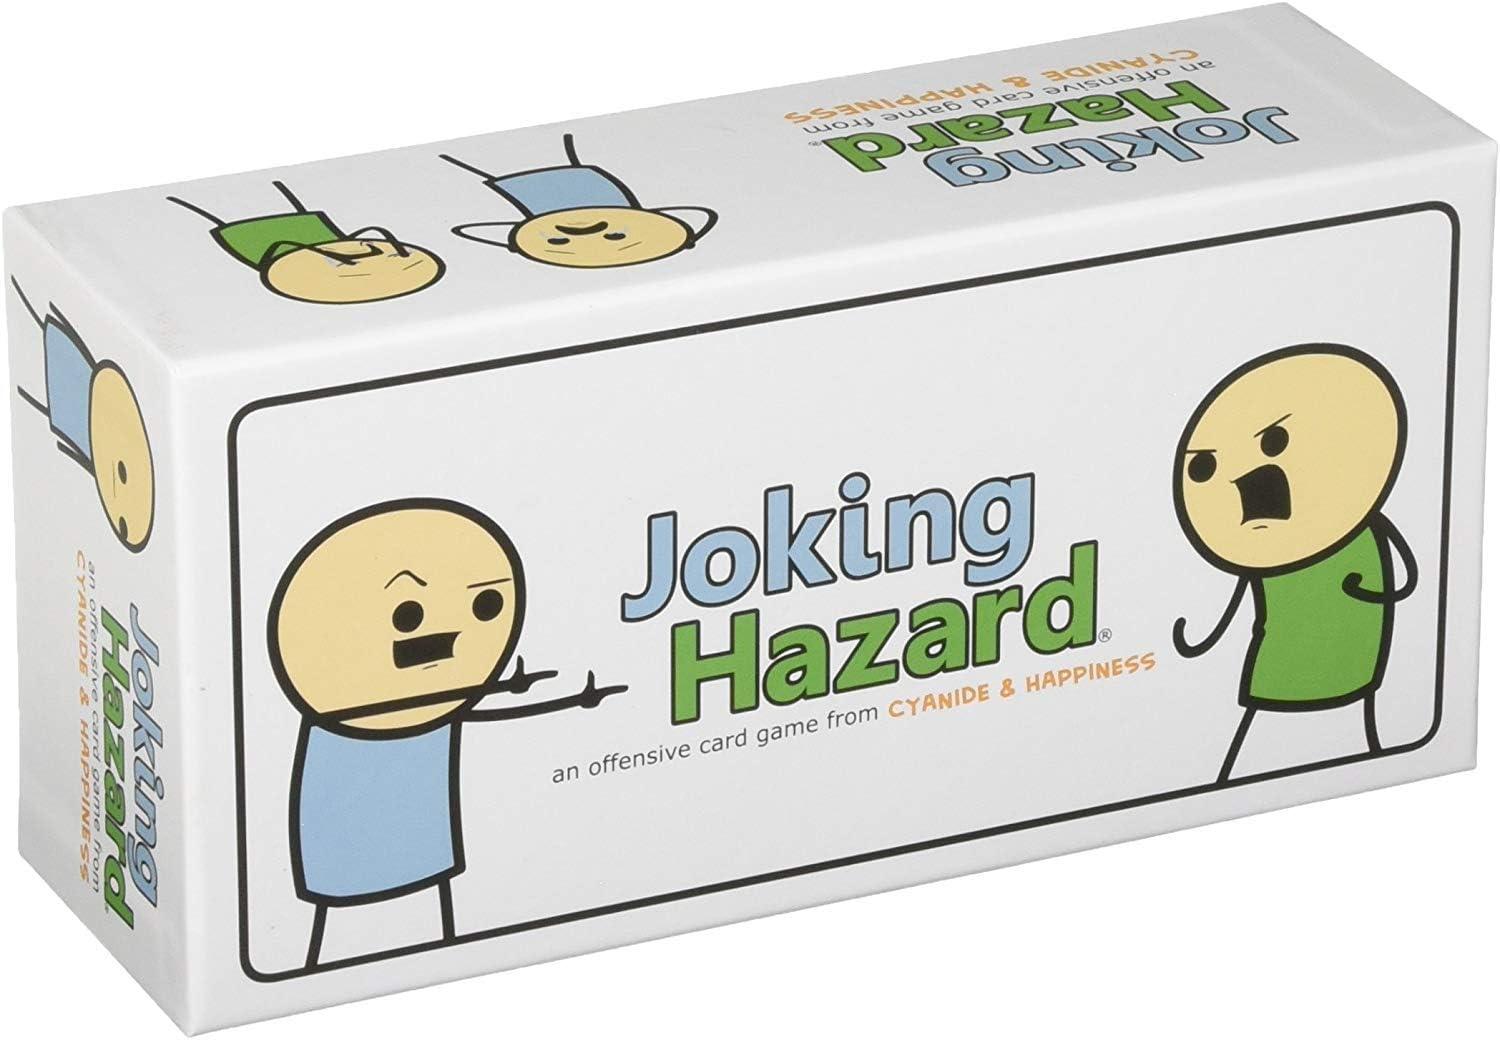 Joking Hazard Comic Building Adult Party Game for $6.62